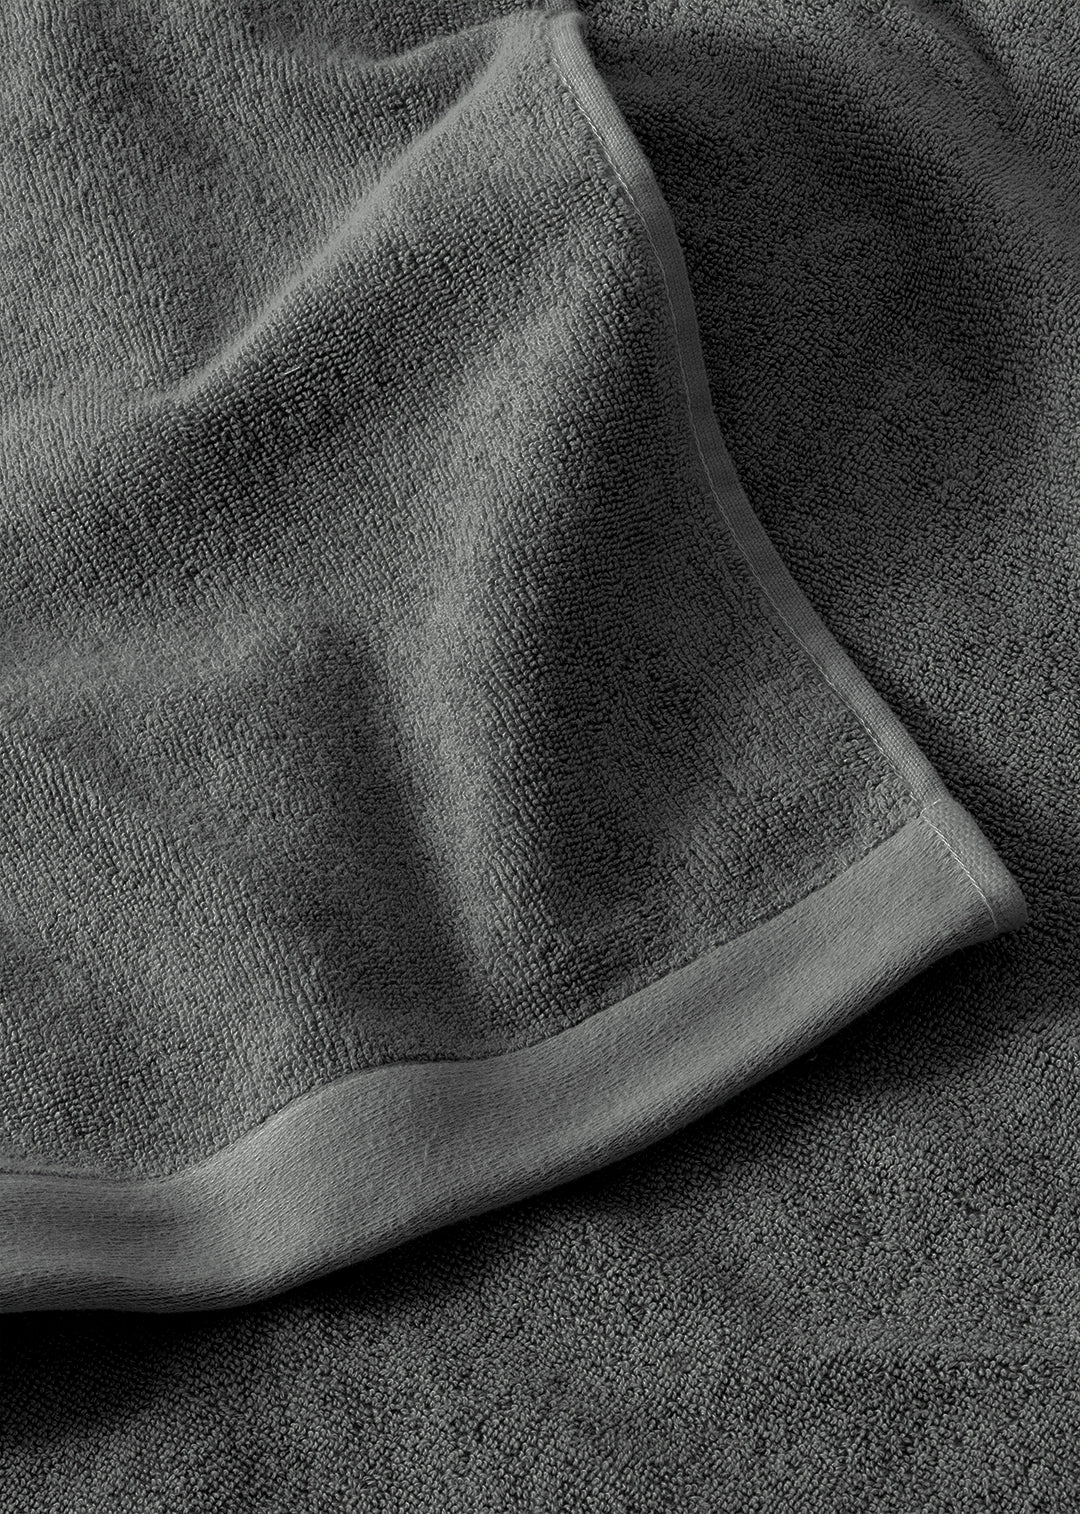 Terry towel - Anthracite